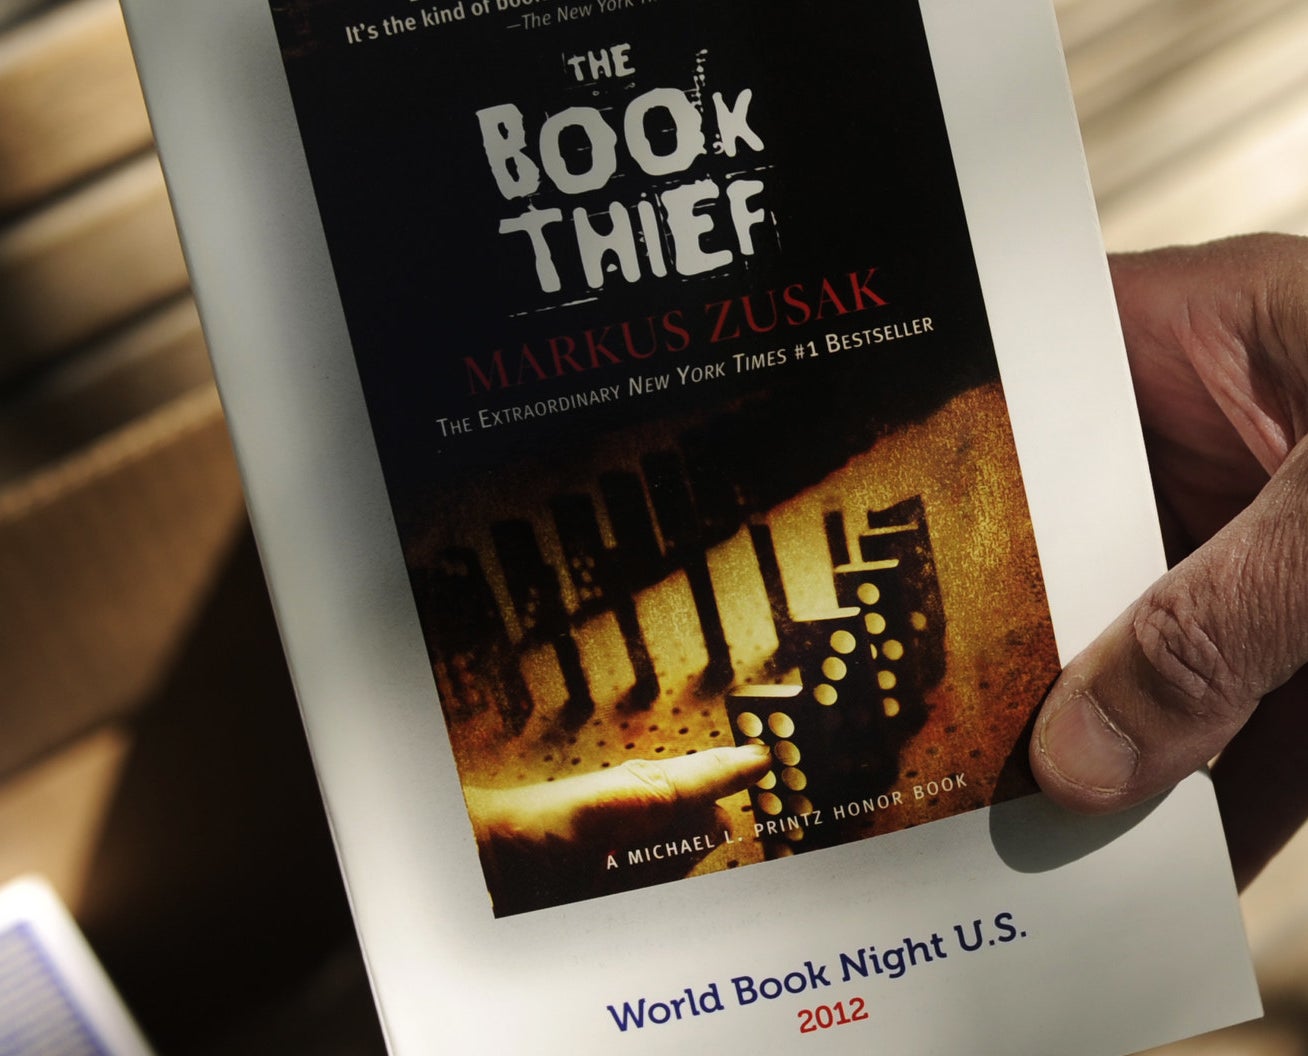 A man hands out free copies of The Book Thief as part of World Book Night